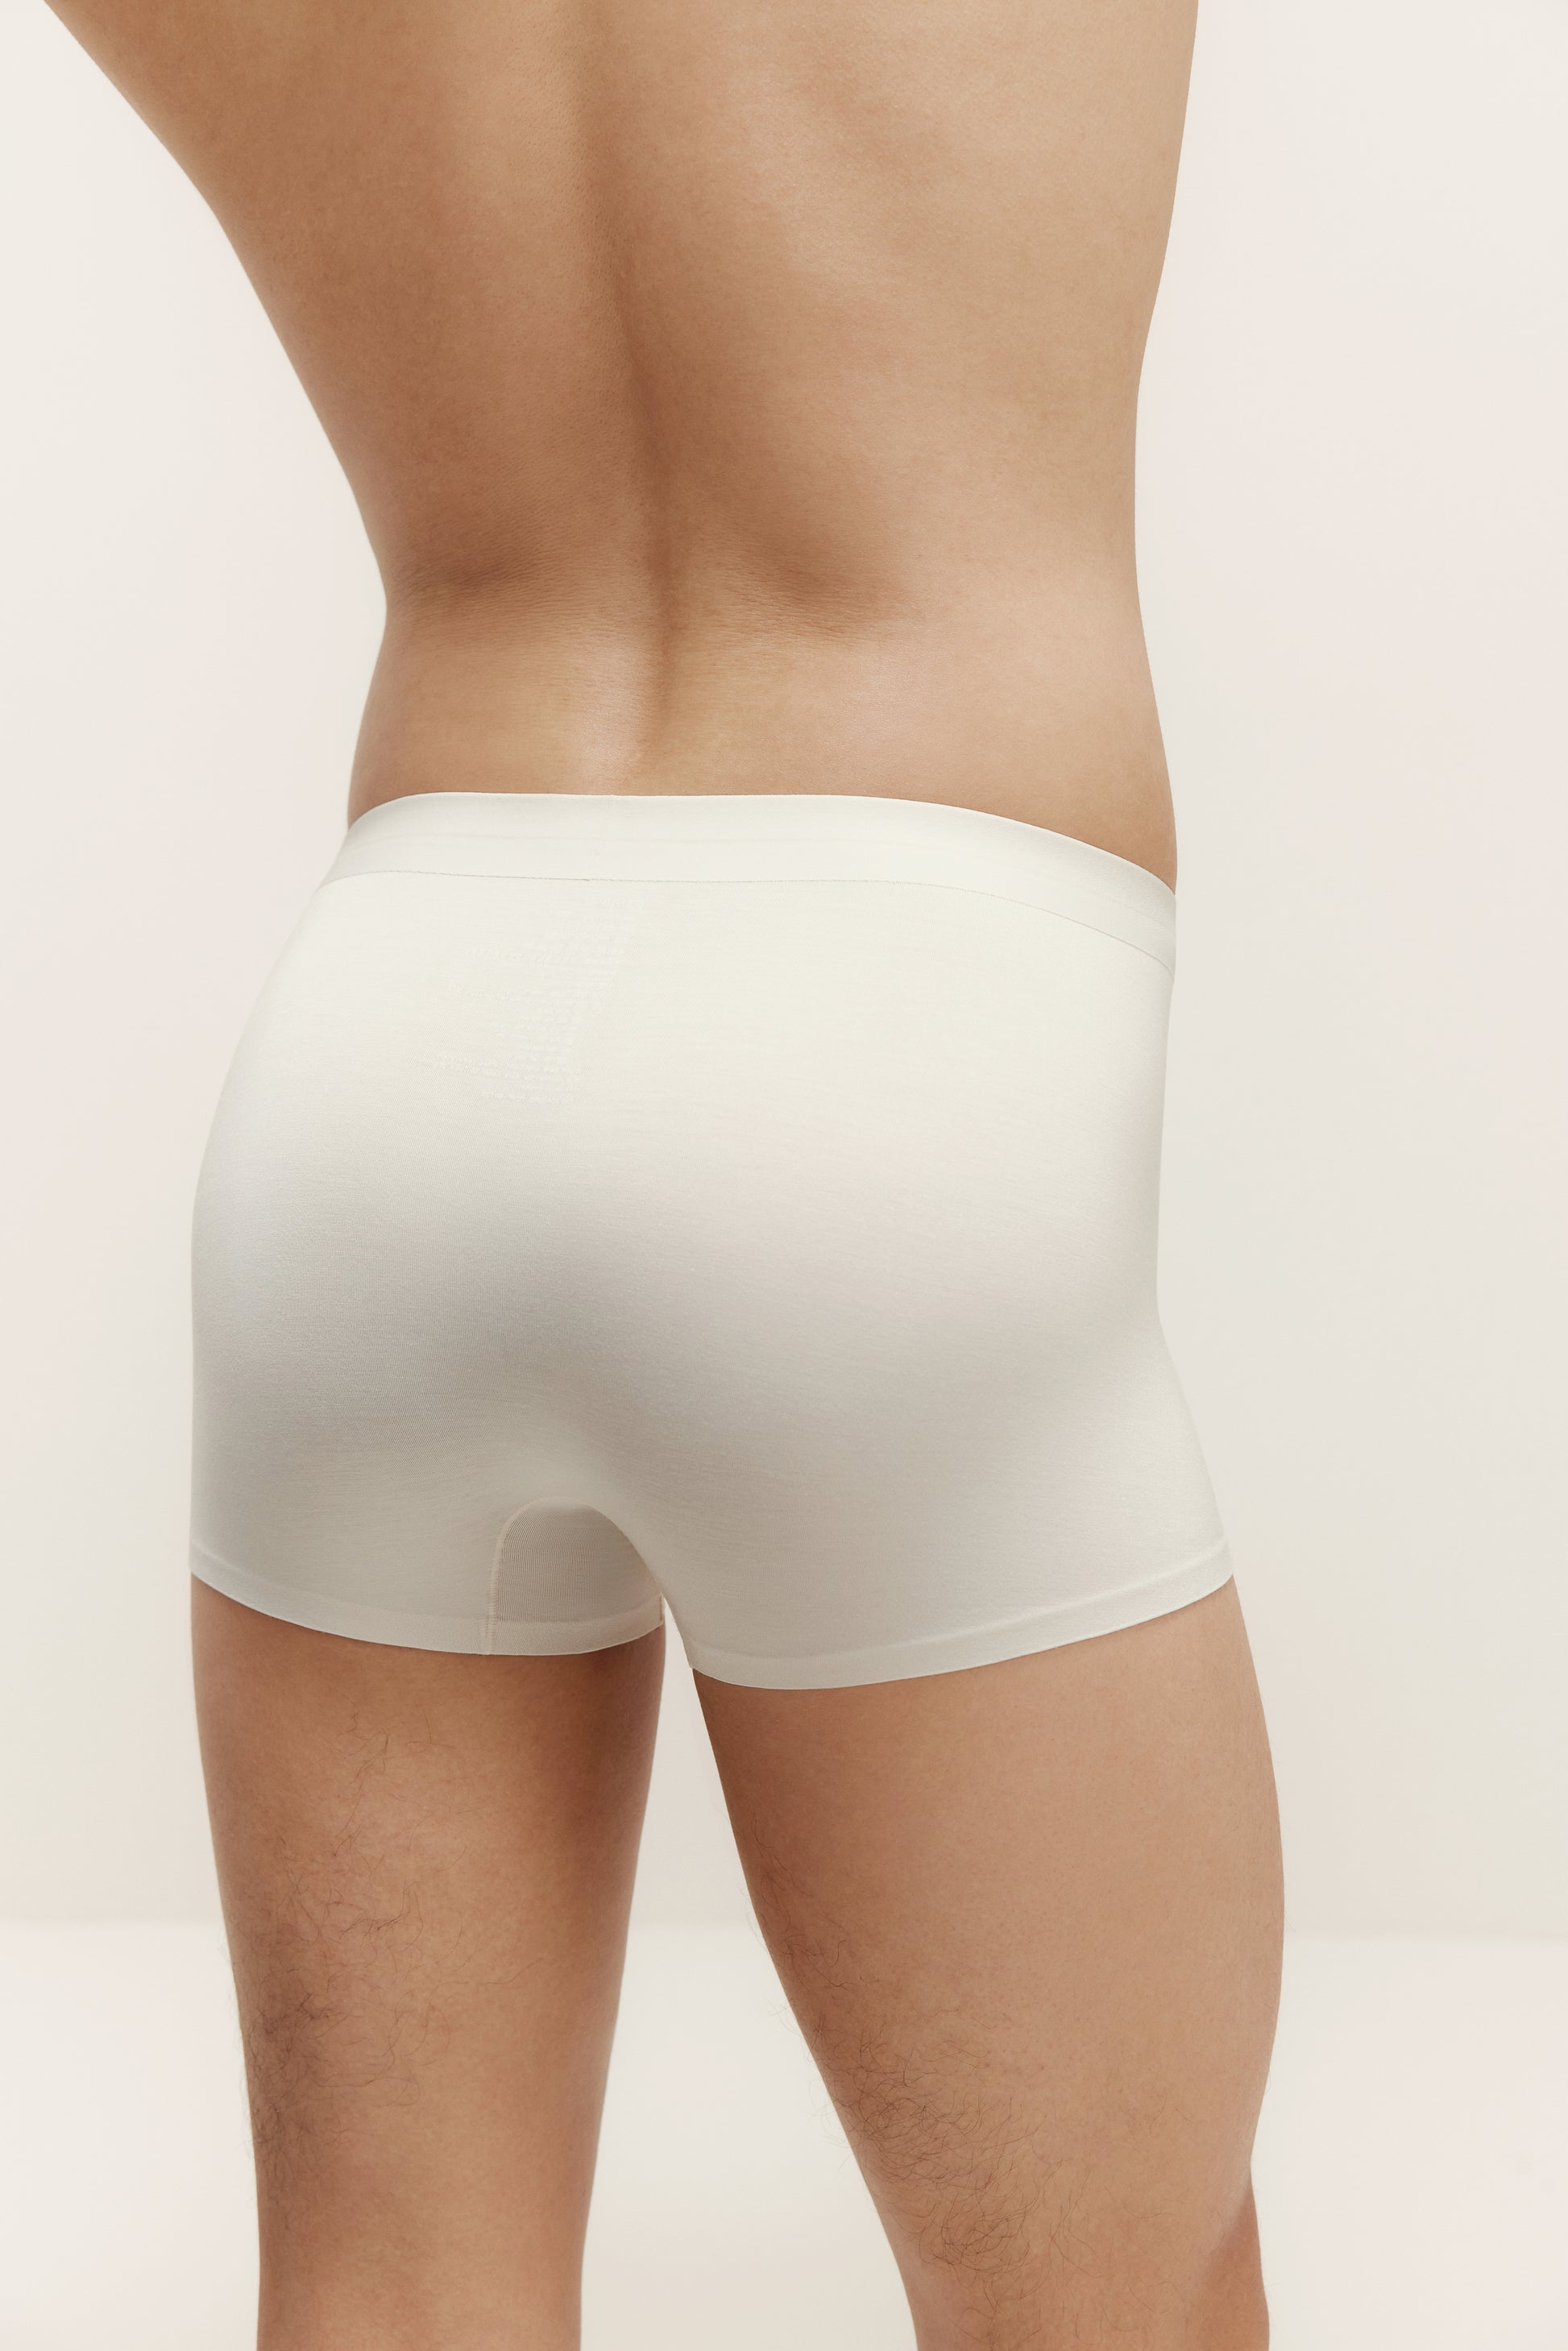 back of man in white brief